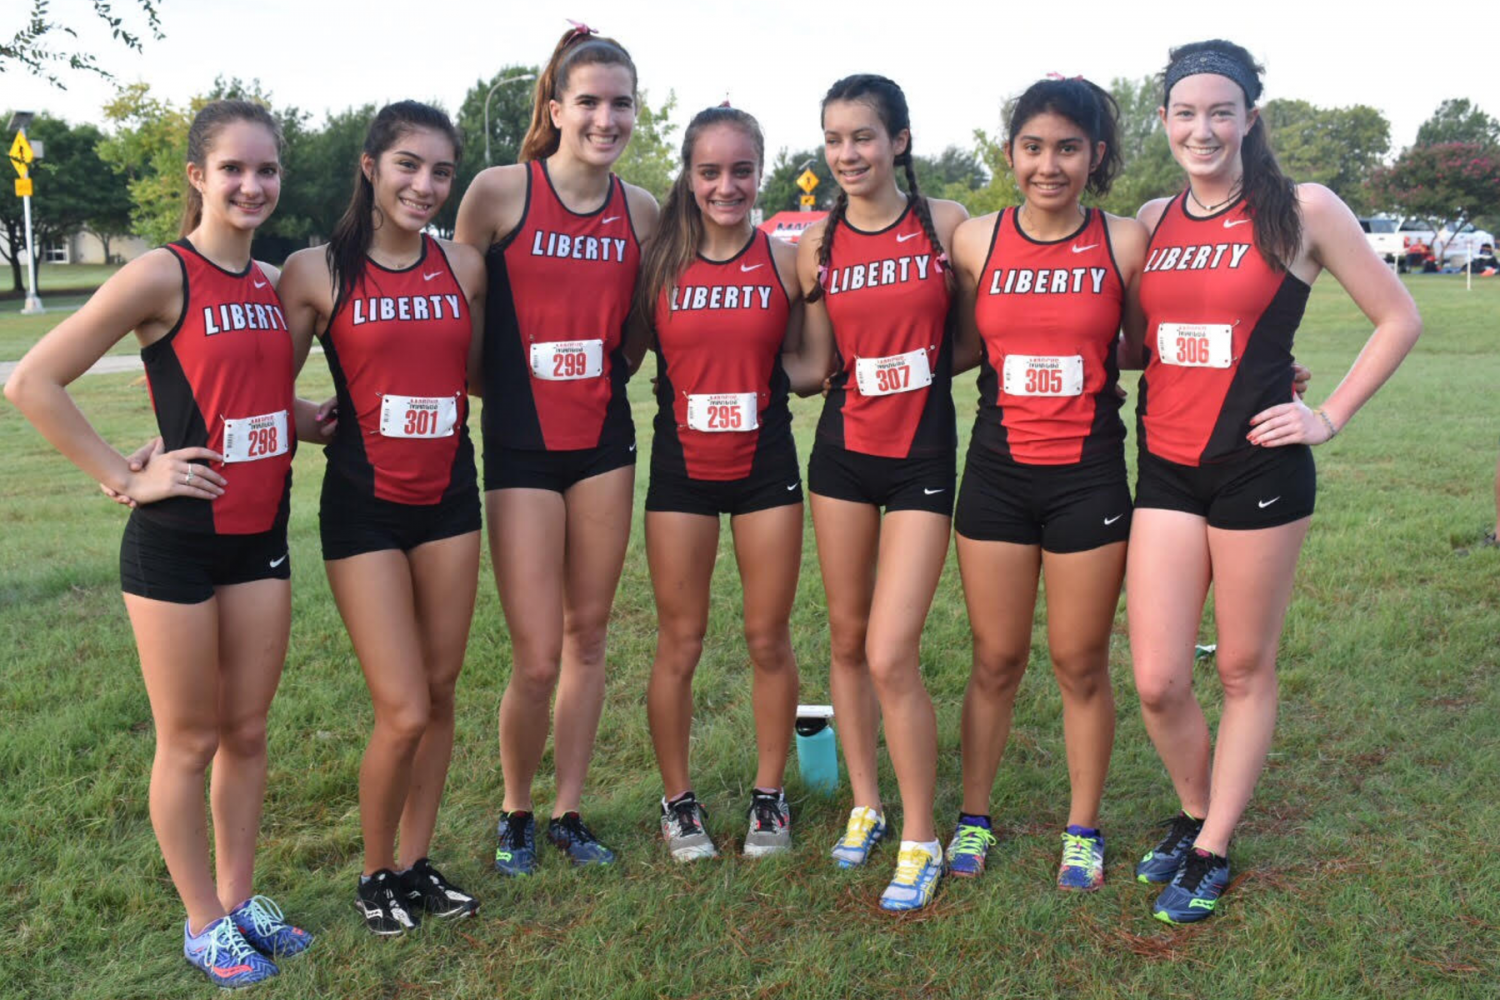 Second from the right, Ruiz  smiles for a picture with the cross country team at a meet.